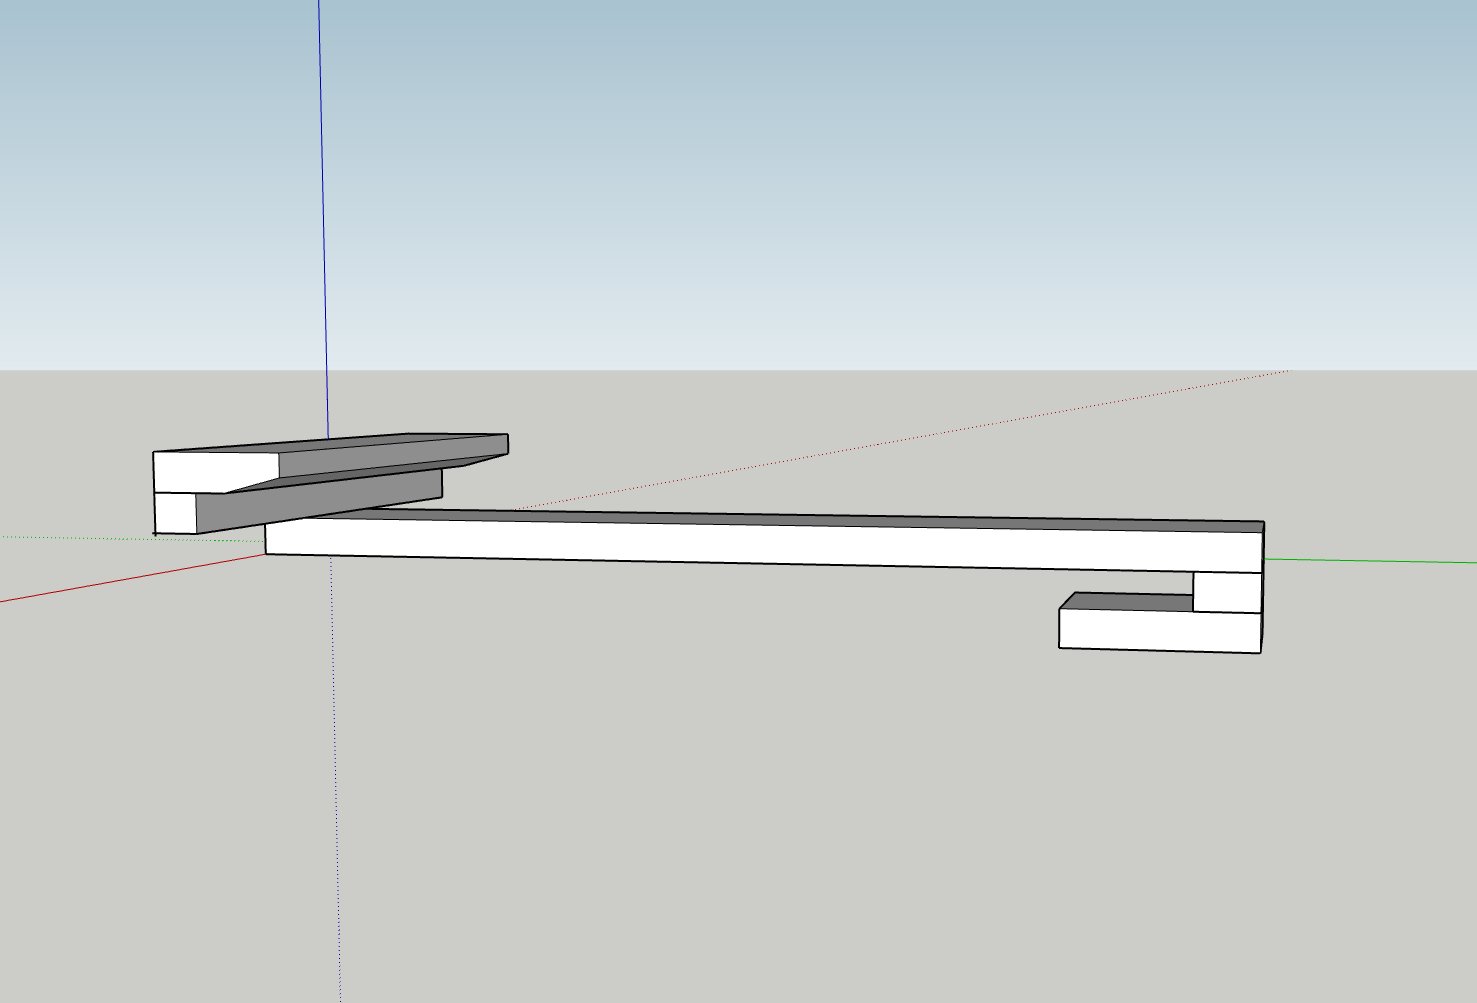 Started with Sketchup